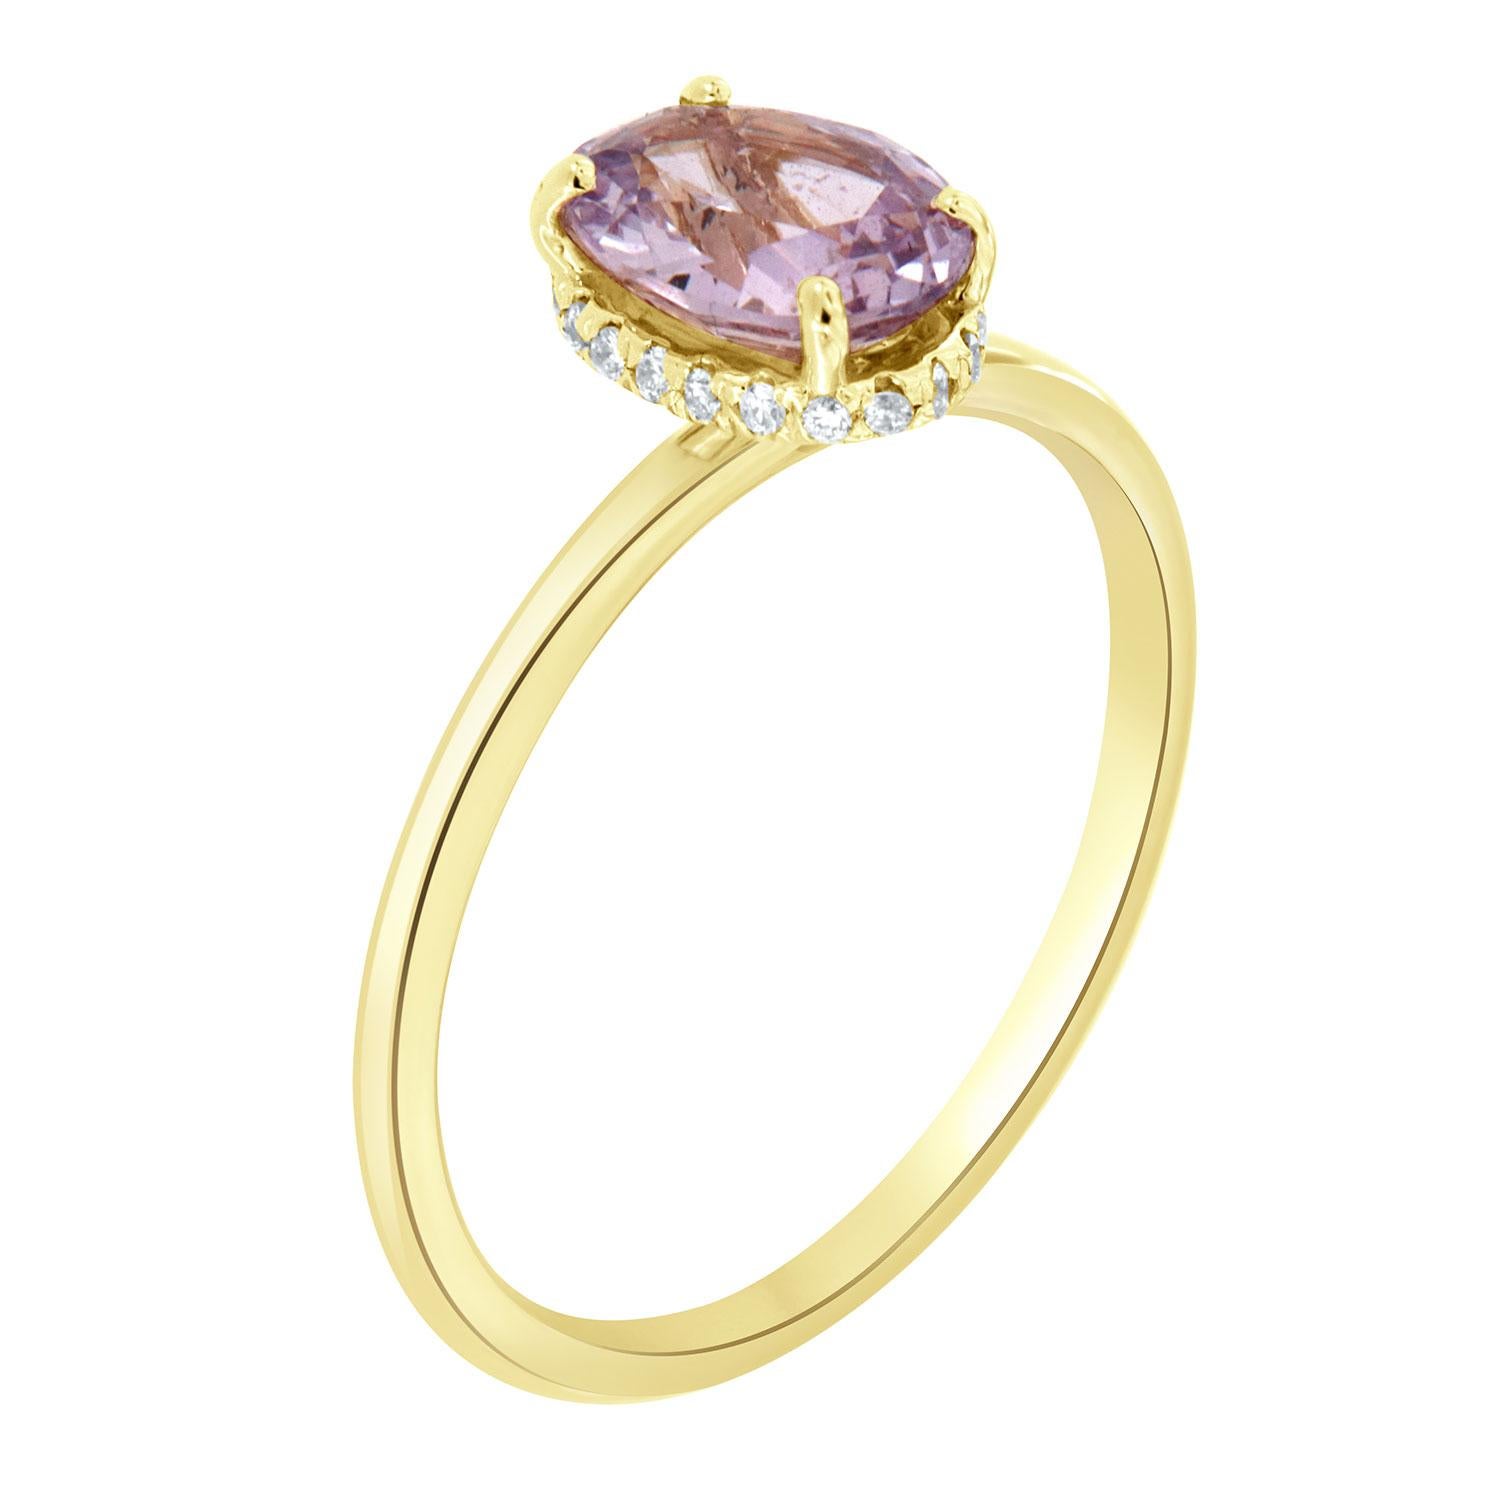 This 14k yellow gold ring features a GIA Certified 1.29 - Carat natural Non-Heated Oval shape Sri-Lankan Sapphire encircled by a hidden halo of brilliant round diamonds on top of a 1.4 MM wide band.
This beautiful Sapphire exhibits a vibrant